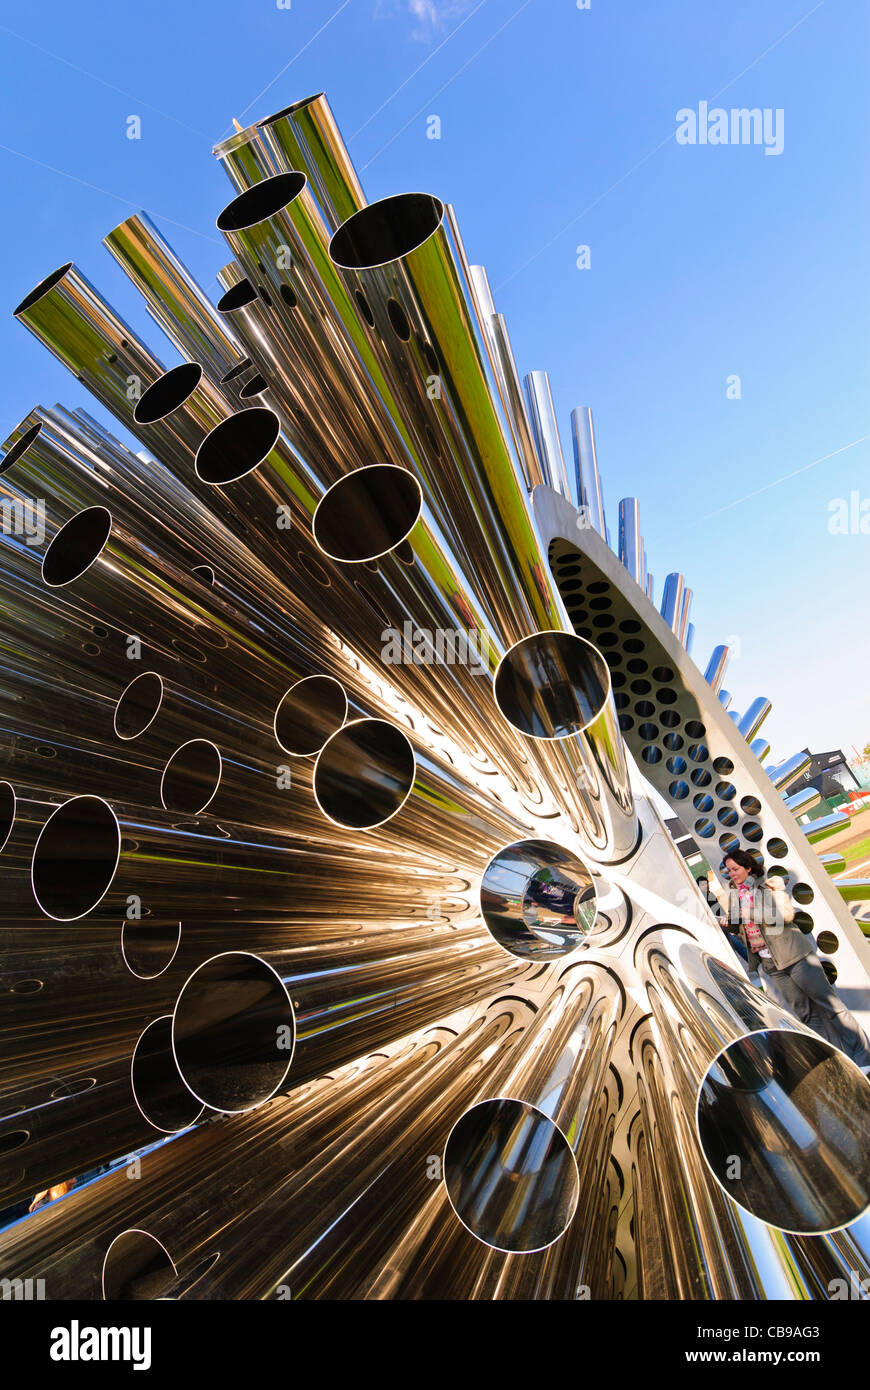 Metal tubes of an Aeolian Harp by Luke Jerram on display at Salford Quays, Manchester, England, UK Stock Photo